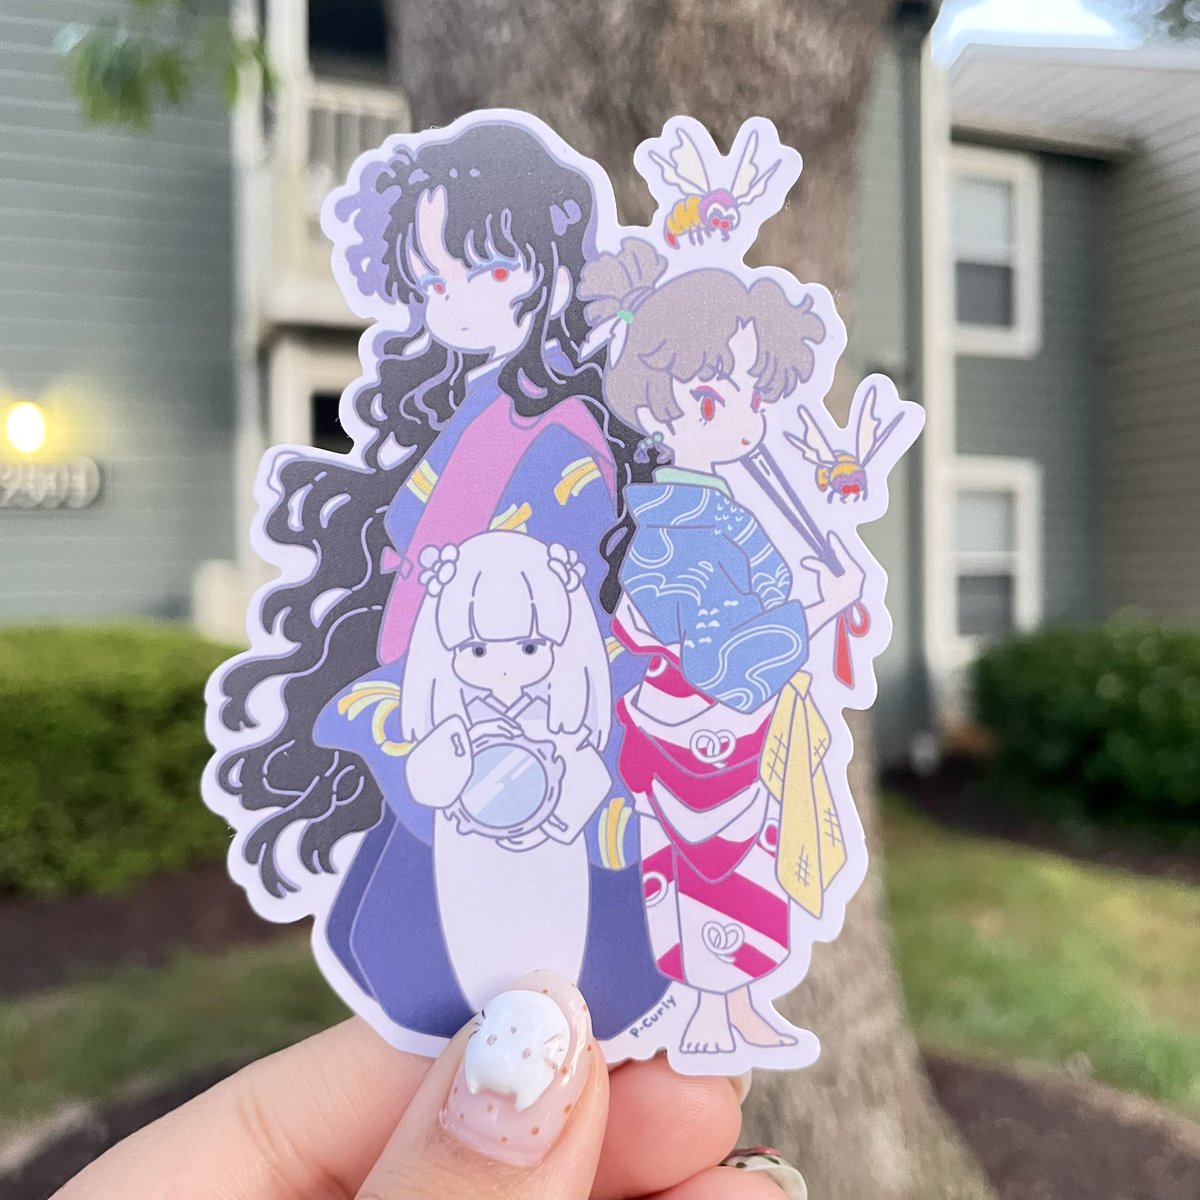 All Inuyasha groups are now available as stickers! Shop 🔗 in bio!